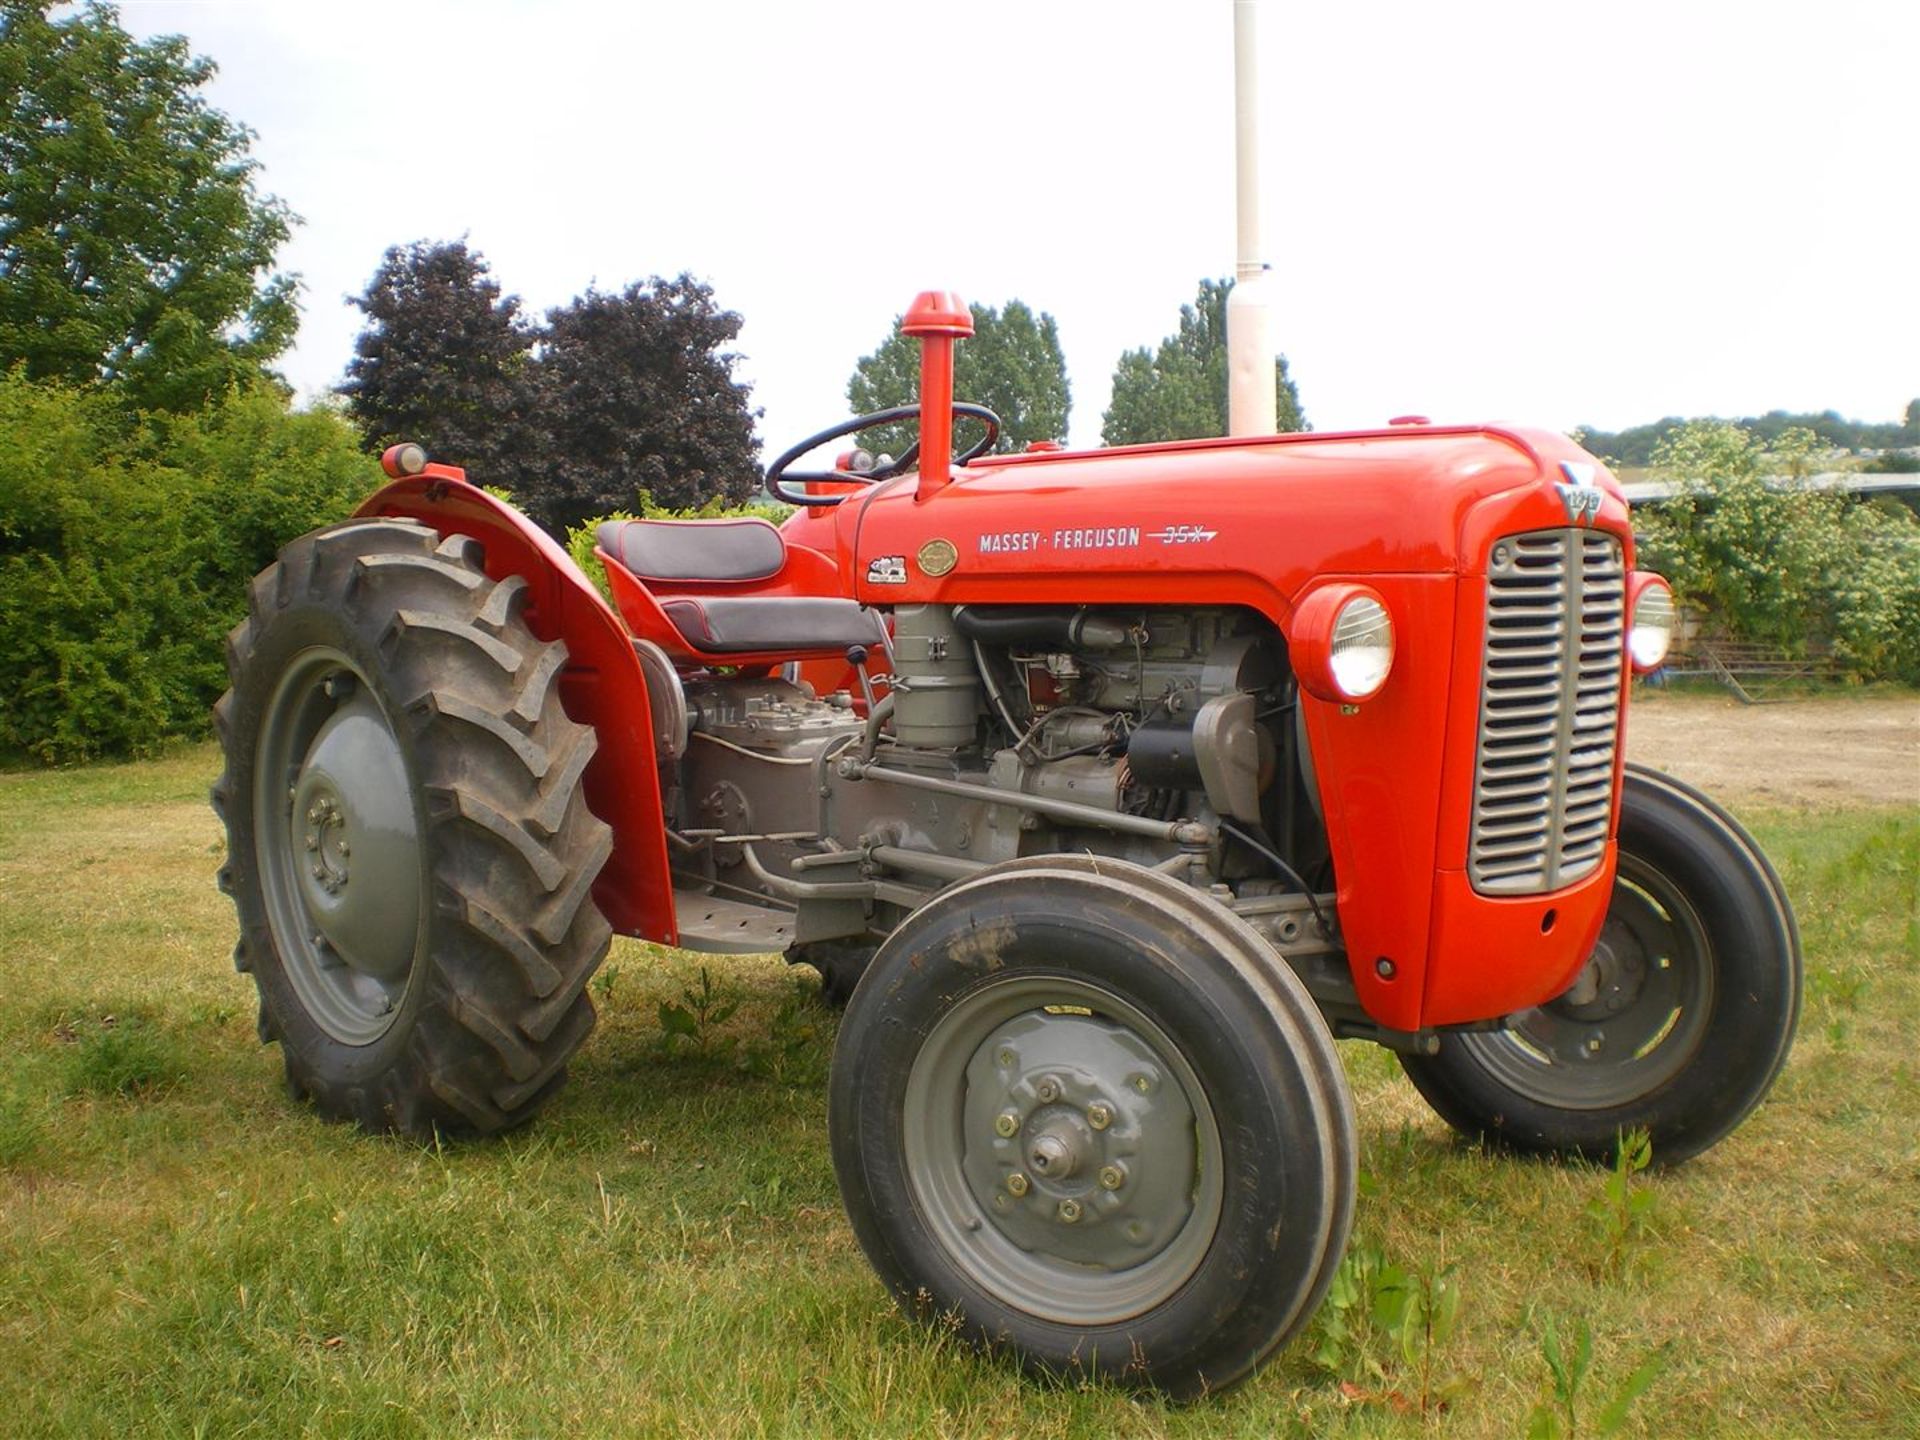 MASSEY FERGUSON 35X 3cylinder diesel TRACTOR Fitted with 4 new tyres, rims, mudguards, steering